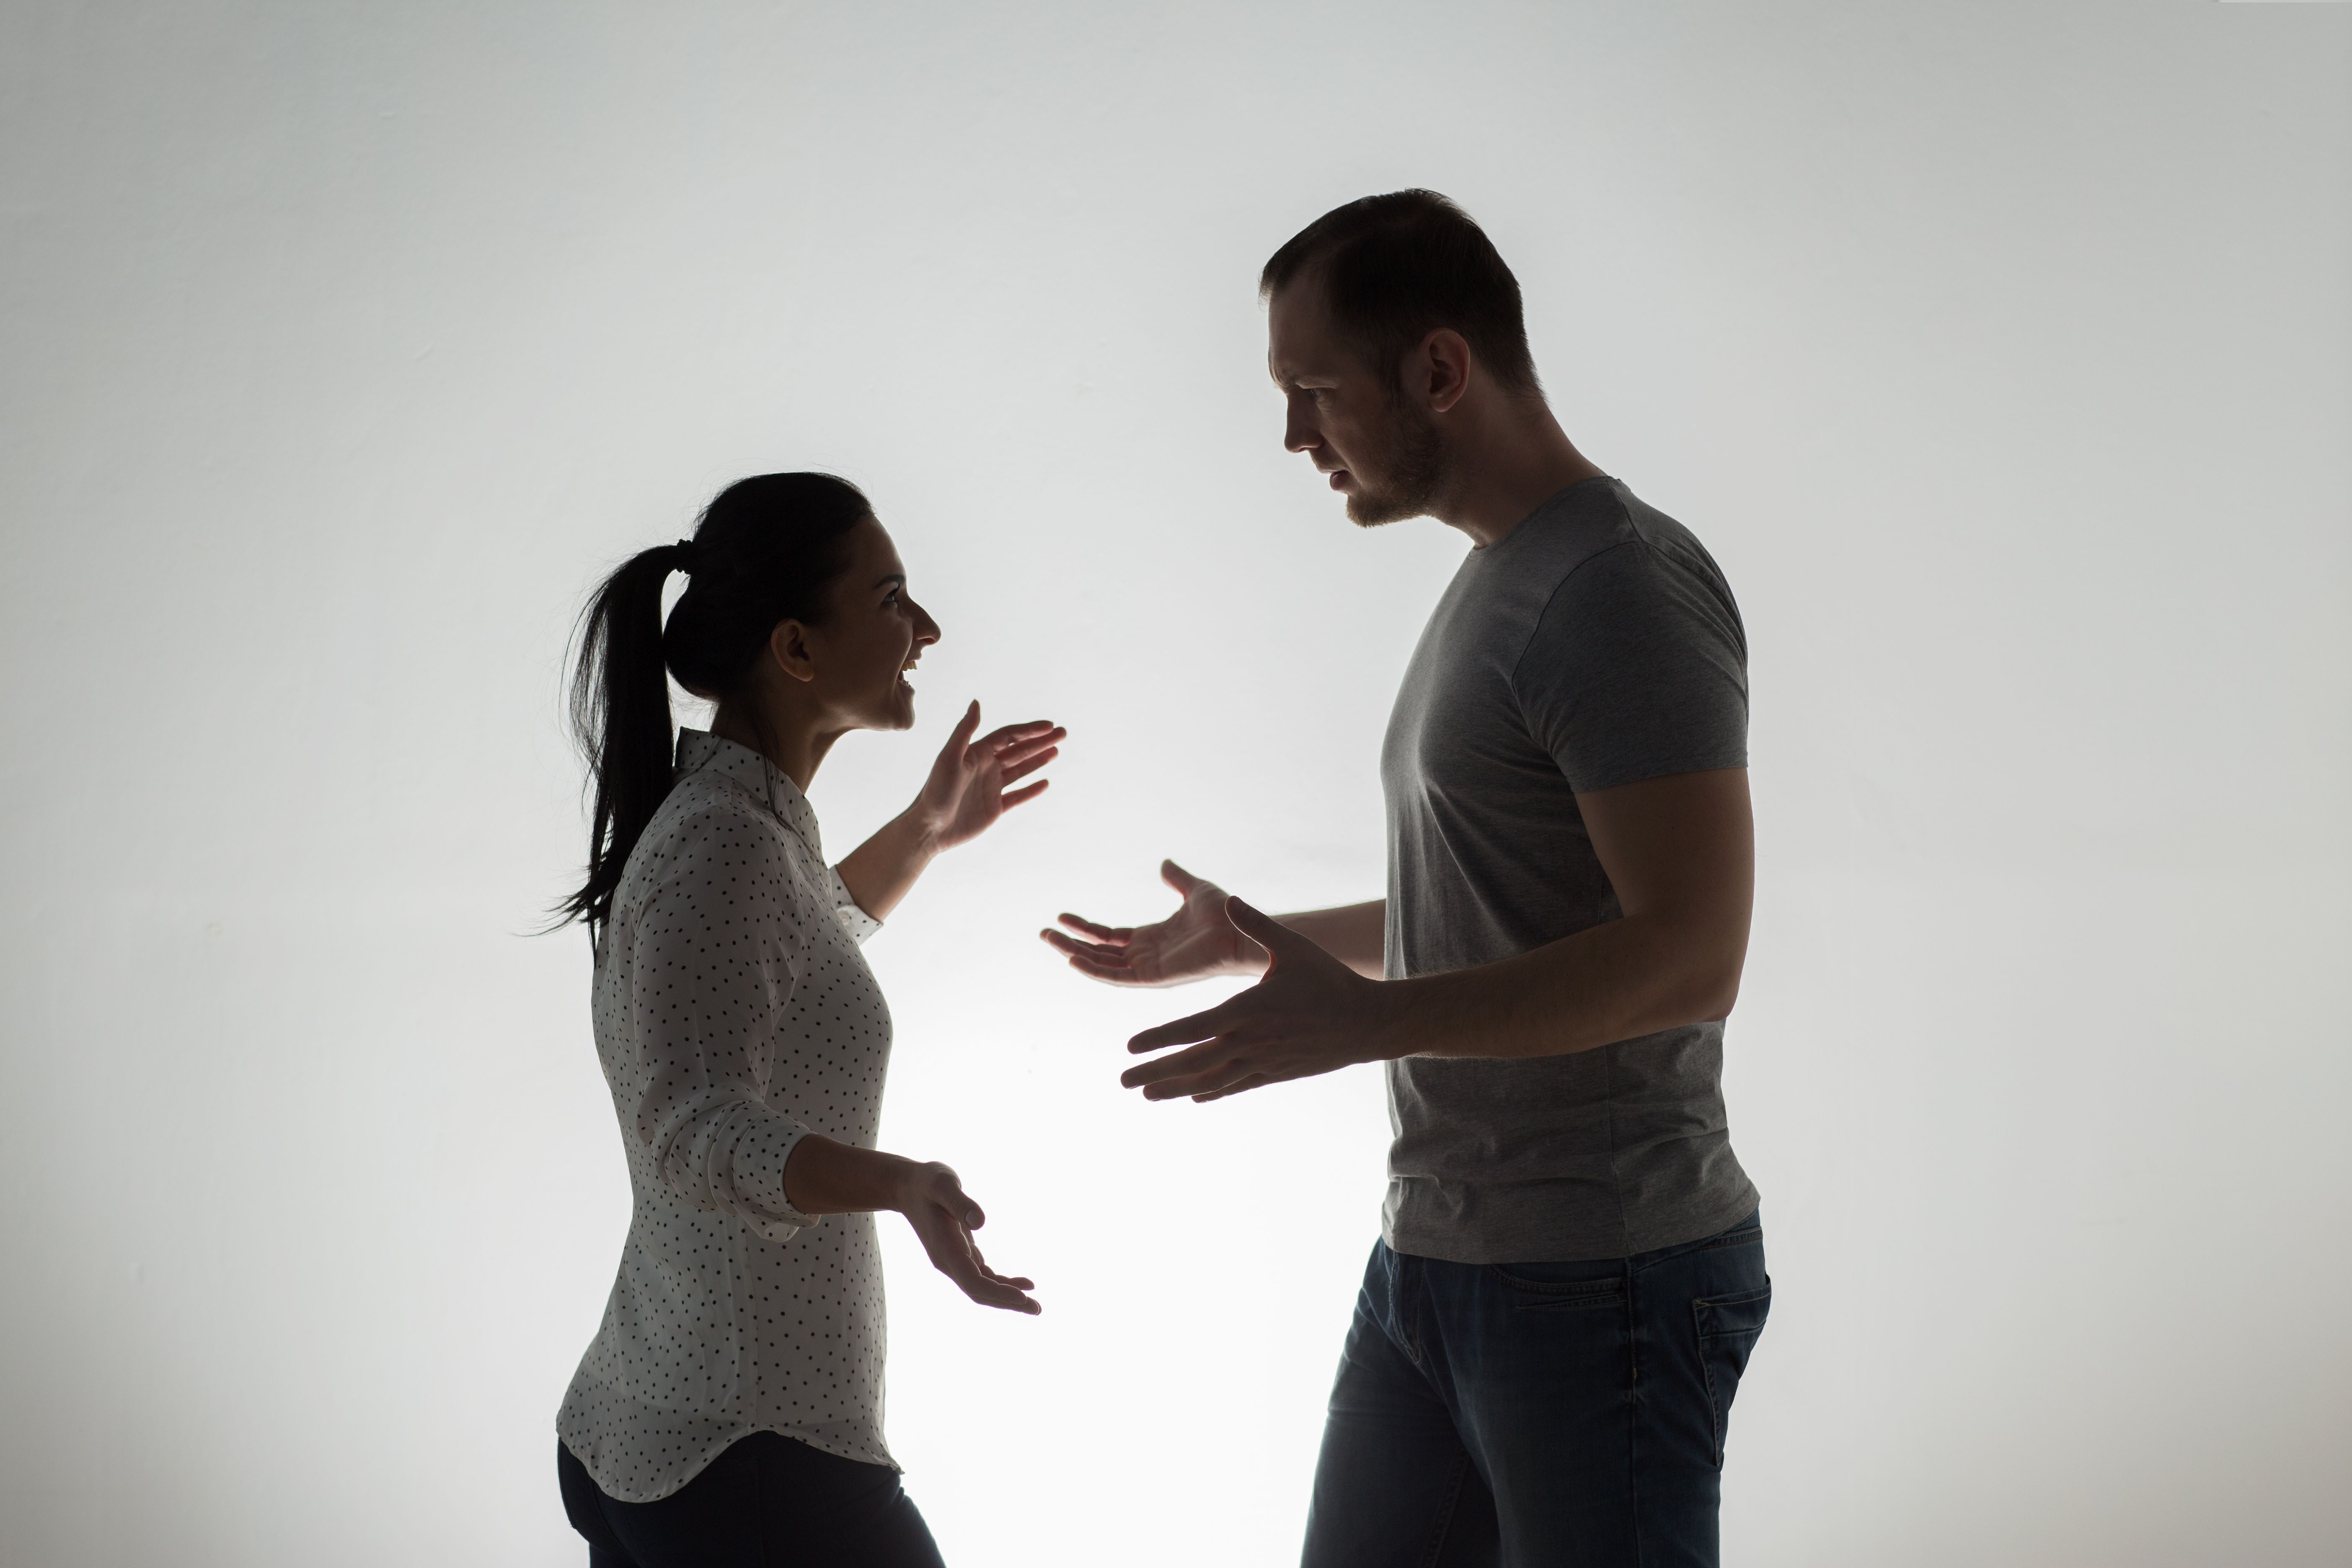 Man and woman arguing | Source: Shutterstock